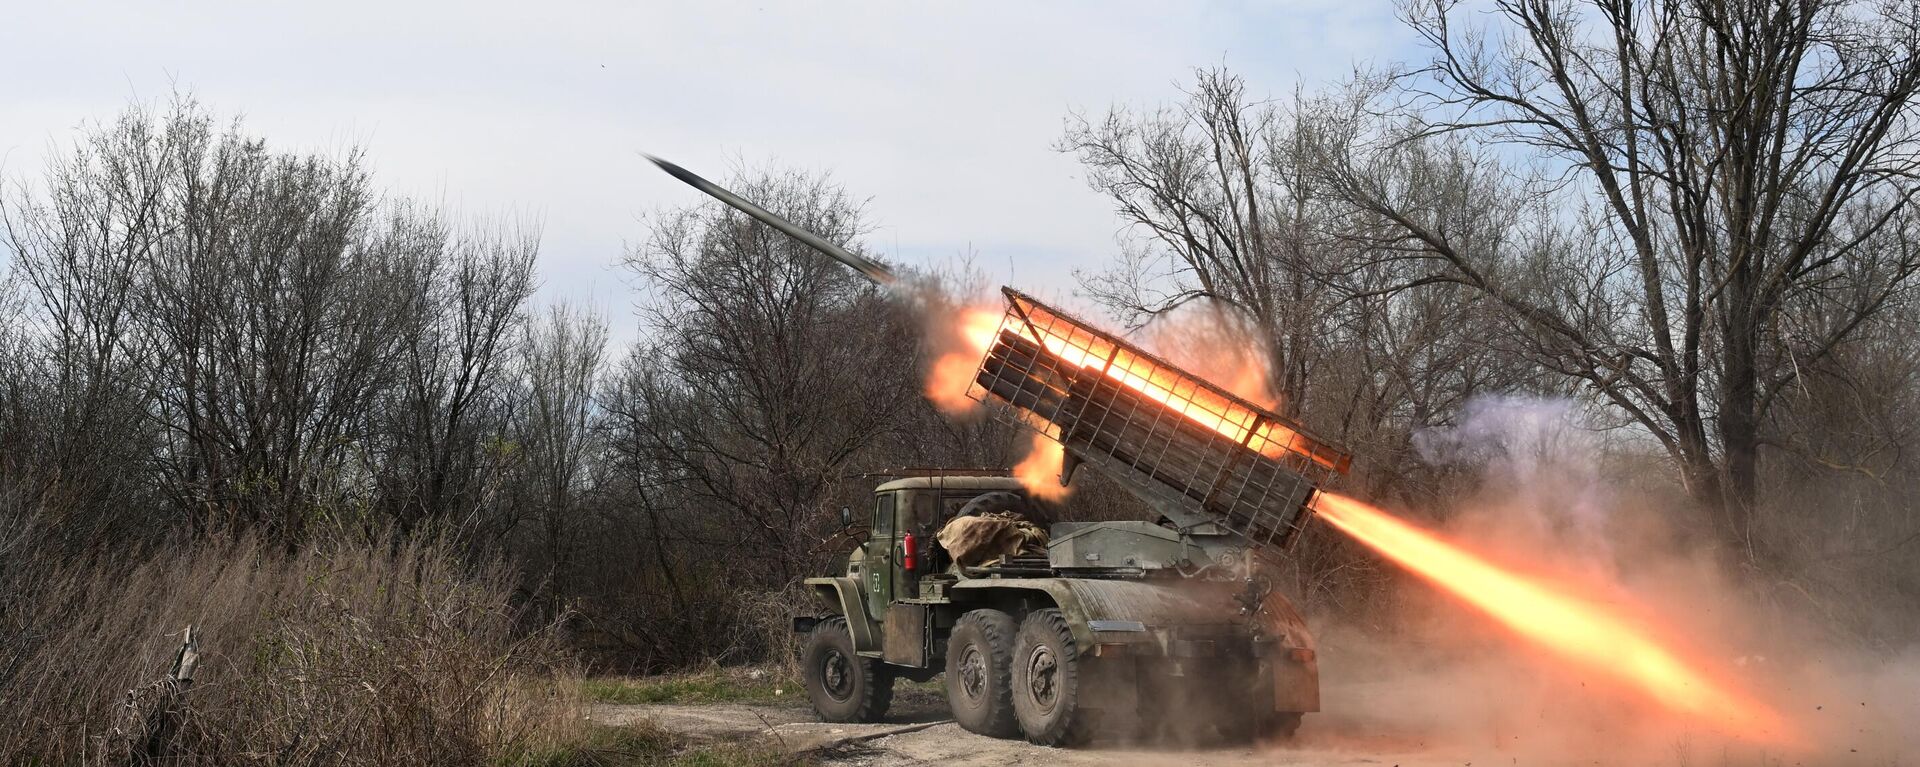 The Grad multiple launch rocket system (MLRS) of the Southern Group of Forces fires at positions of the Ukrainian troops in the zone of a special military operation. - Sputnik International, 1920, 10.05.2024